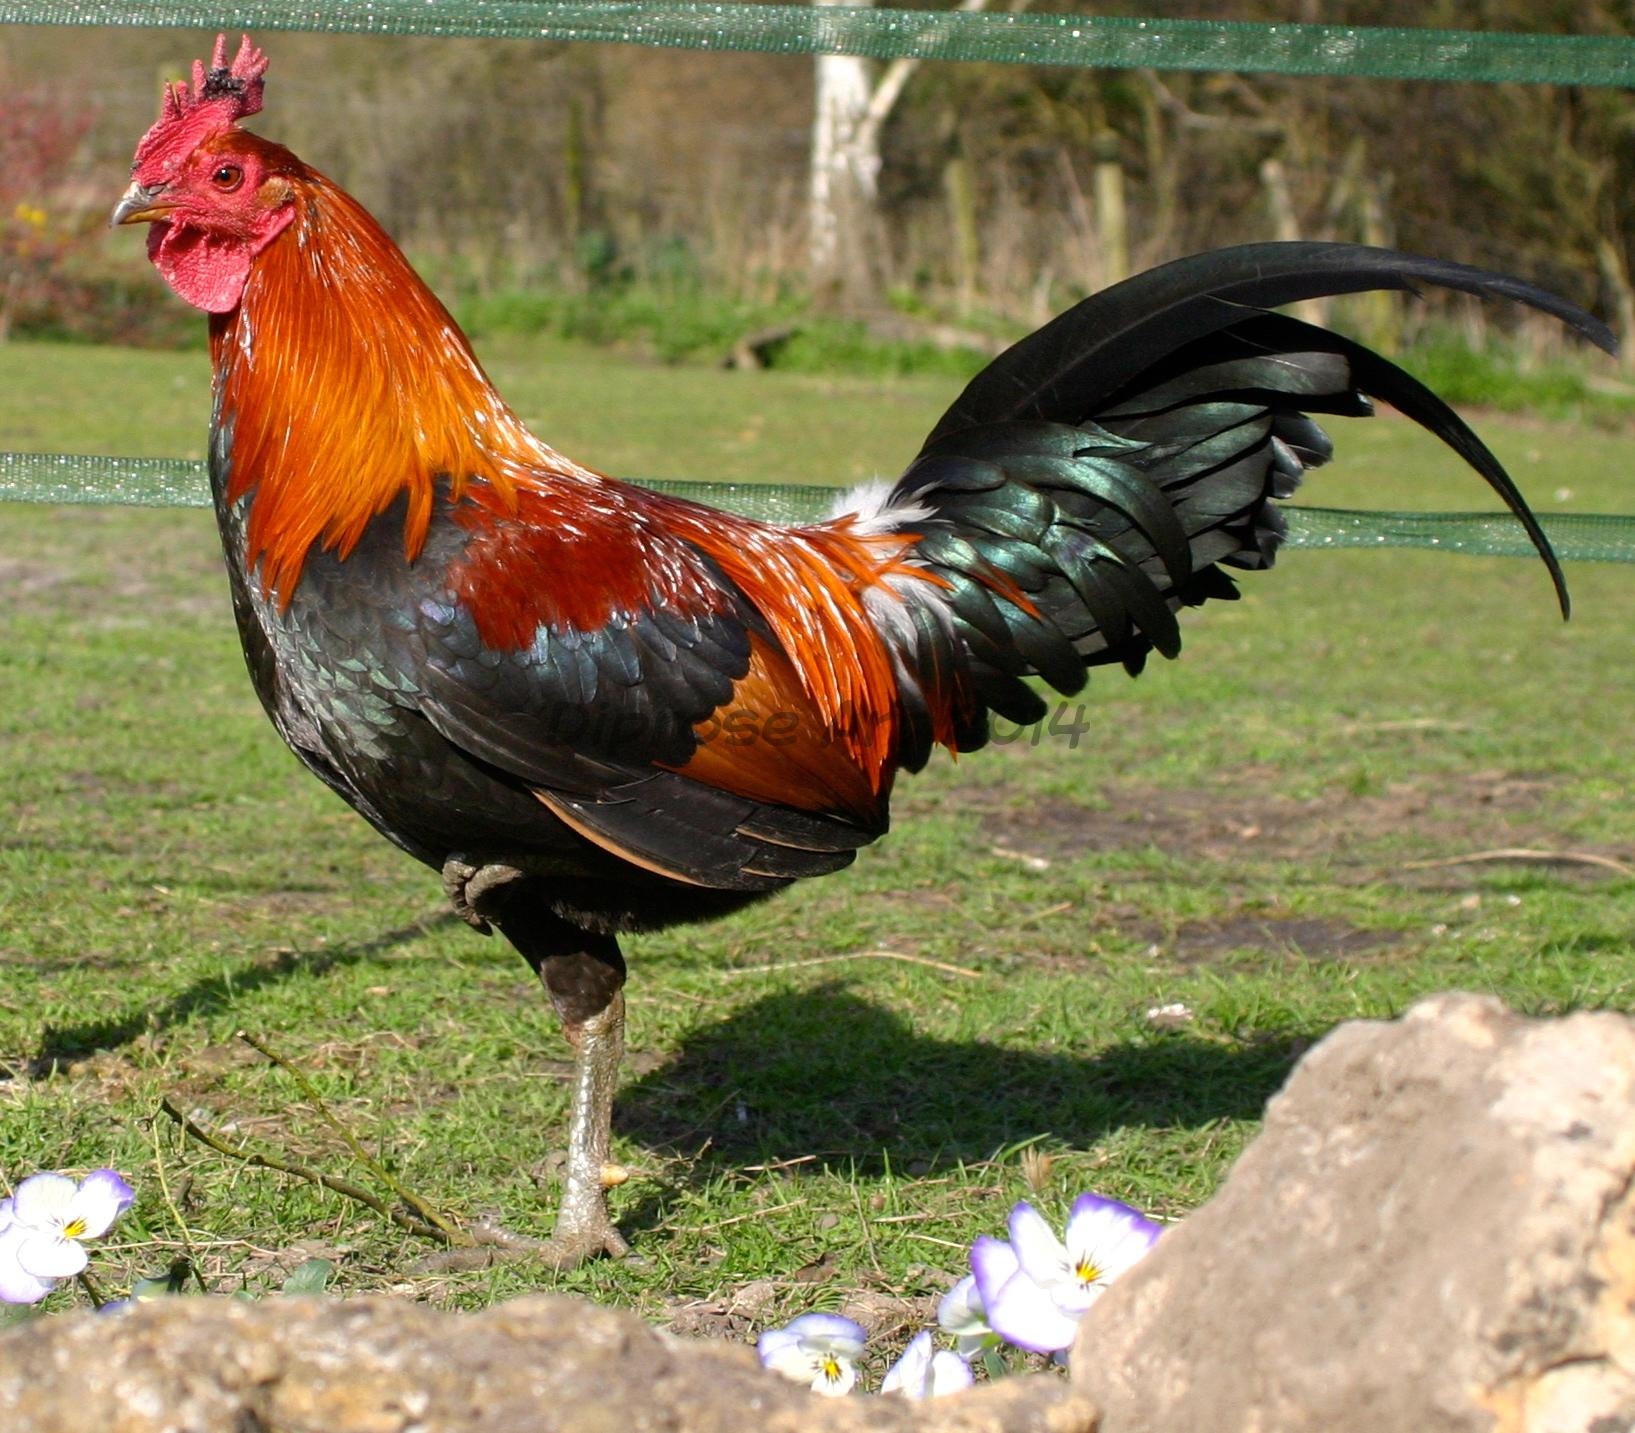 This gorgeous bird is a traditional cockerel - he has the most amazing colours